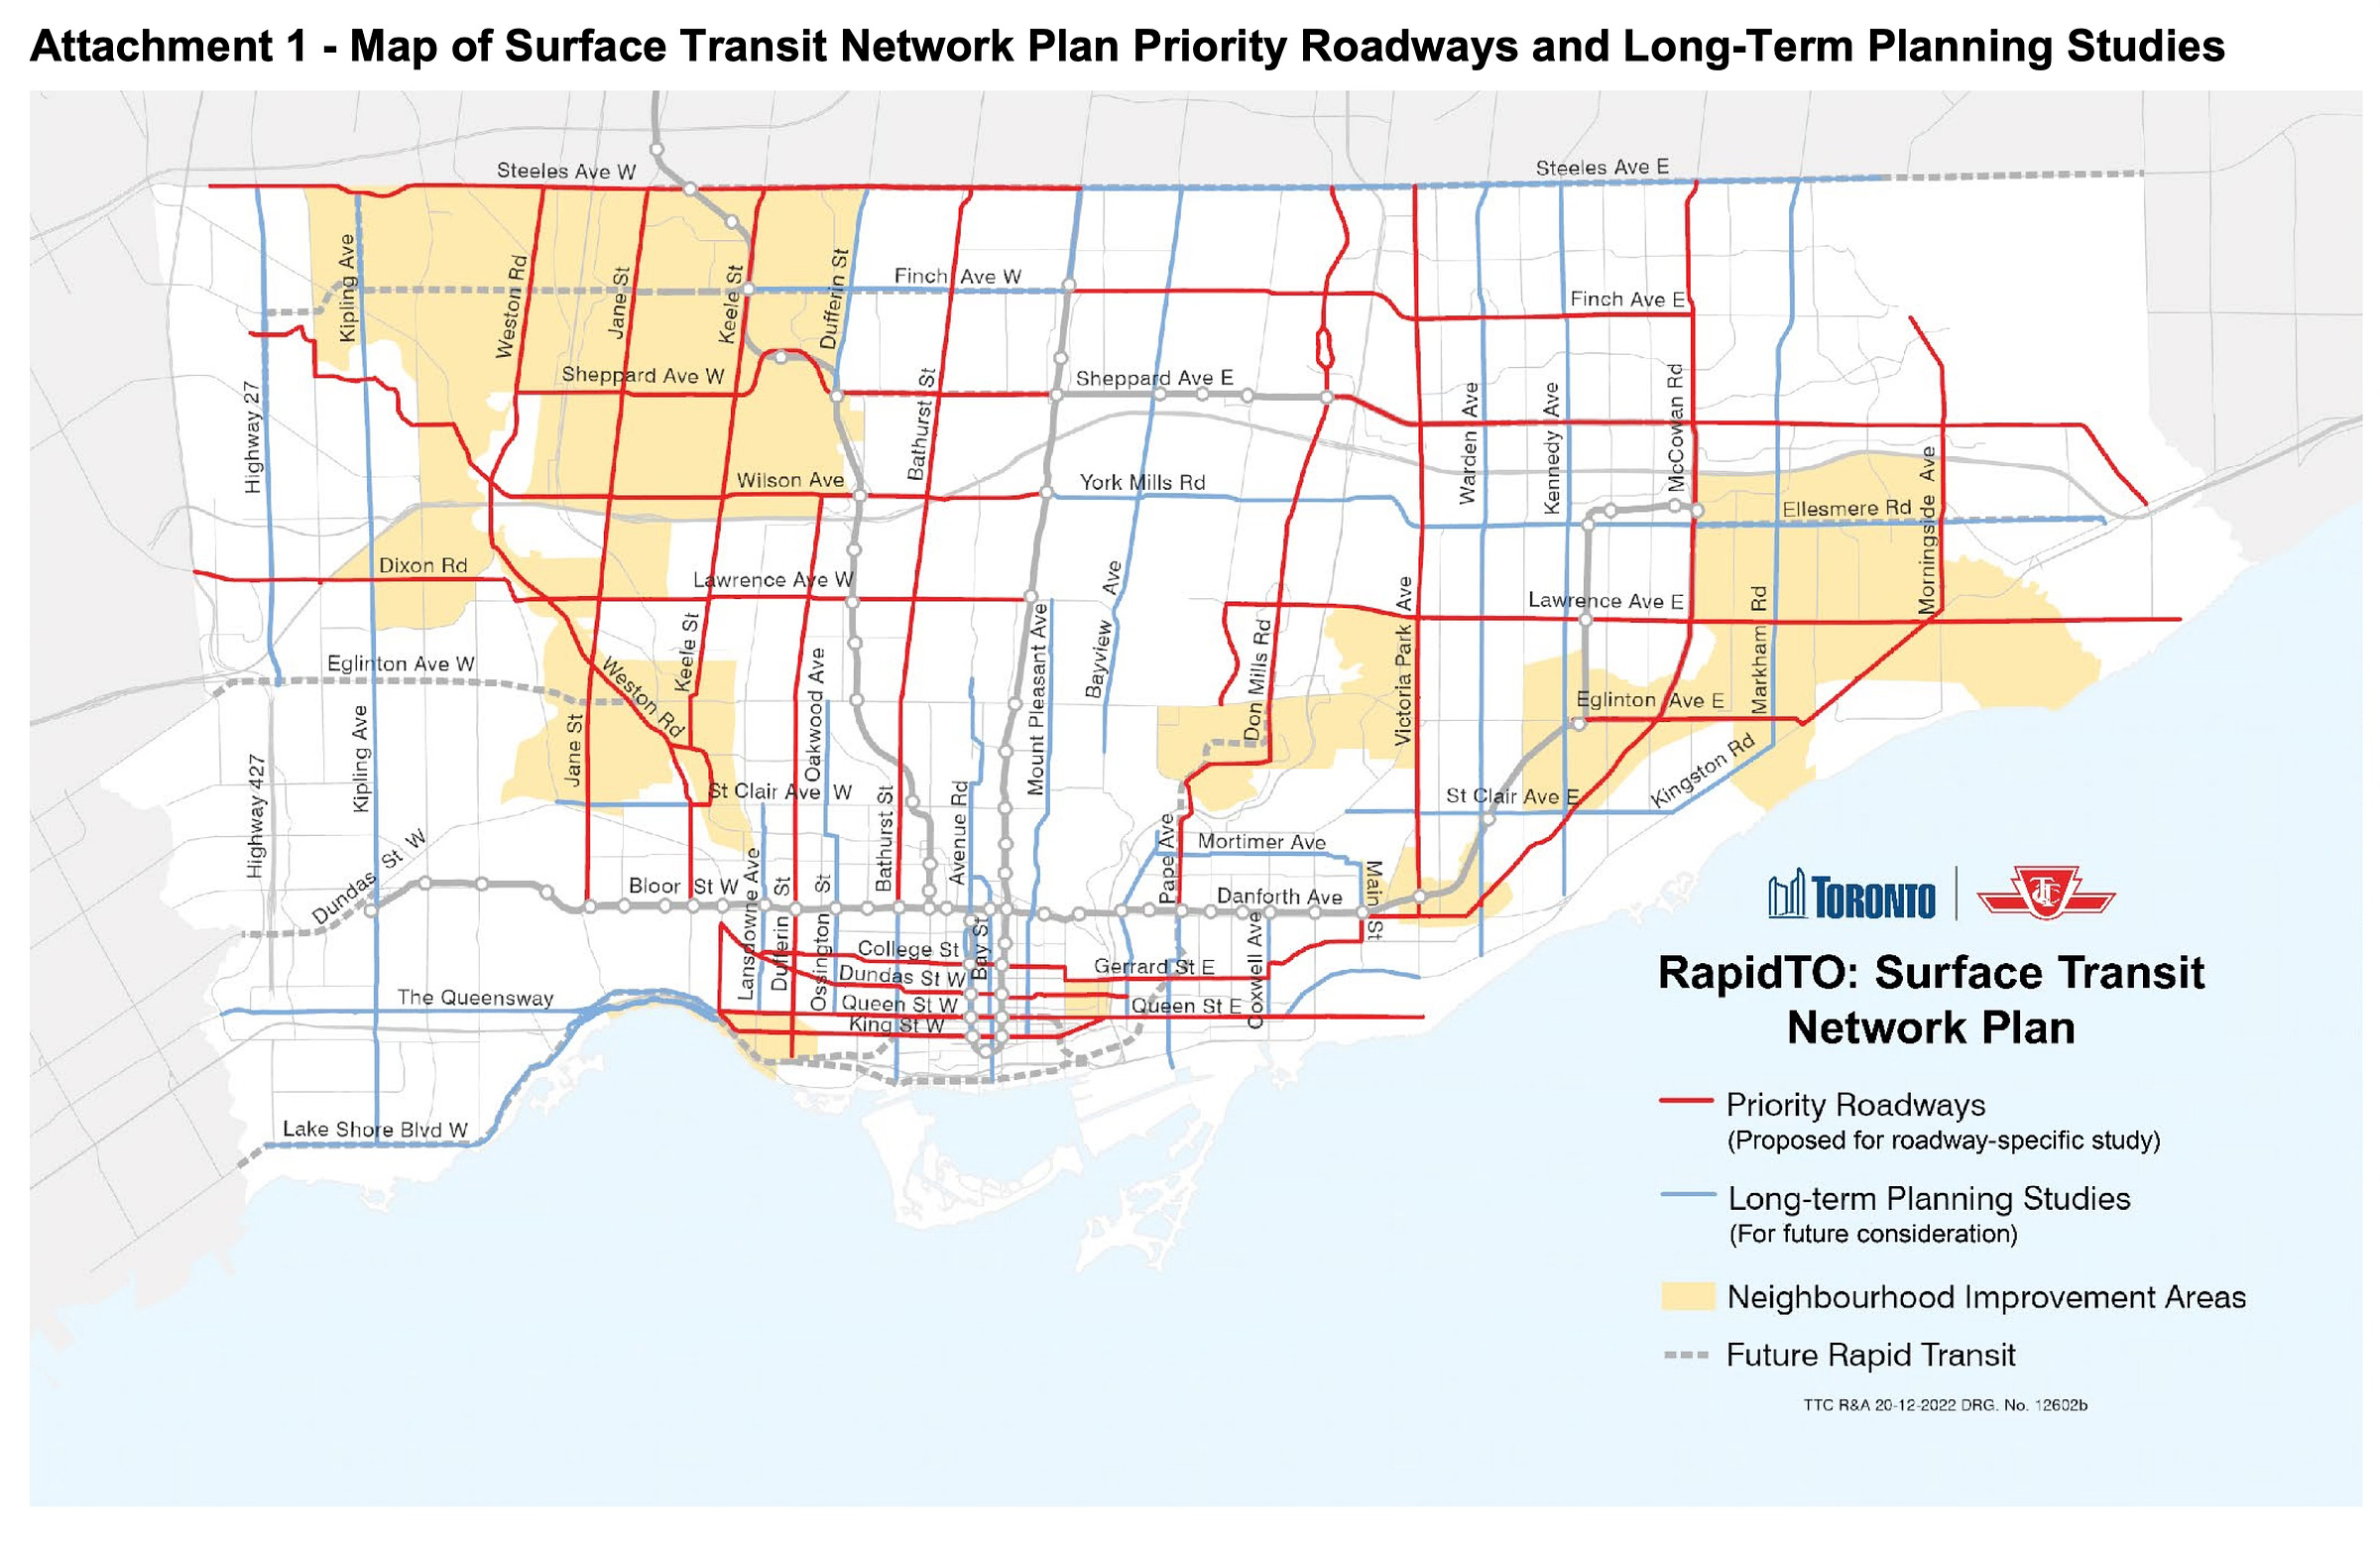 Map of priority roadways for transit upgrades, including dedicated bus lanes